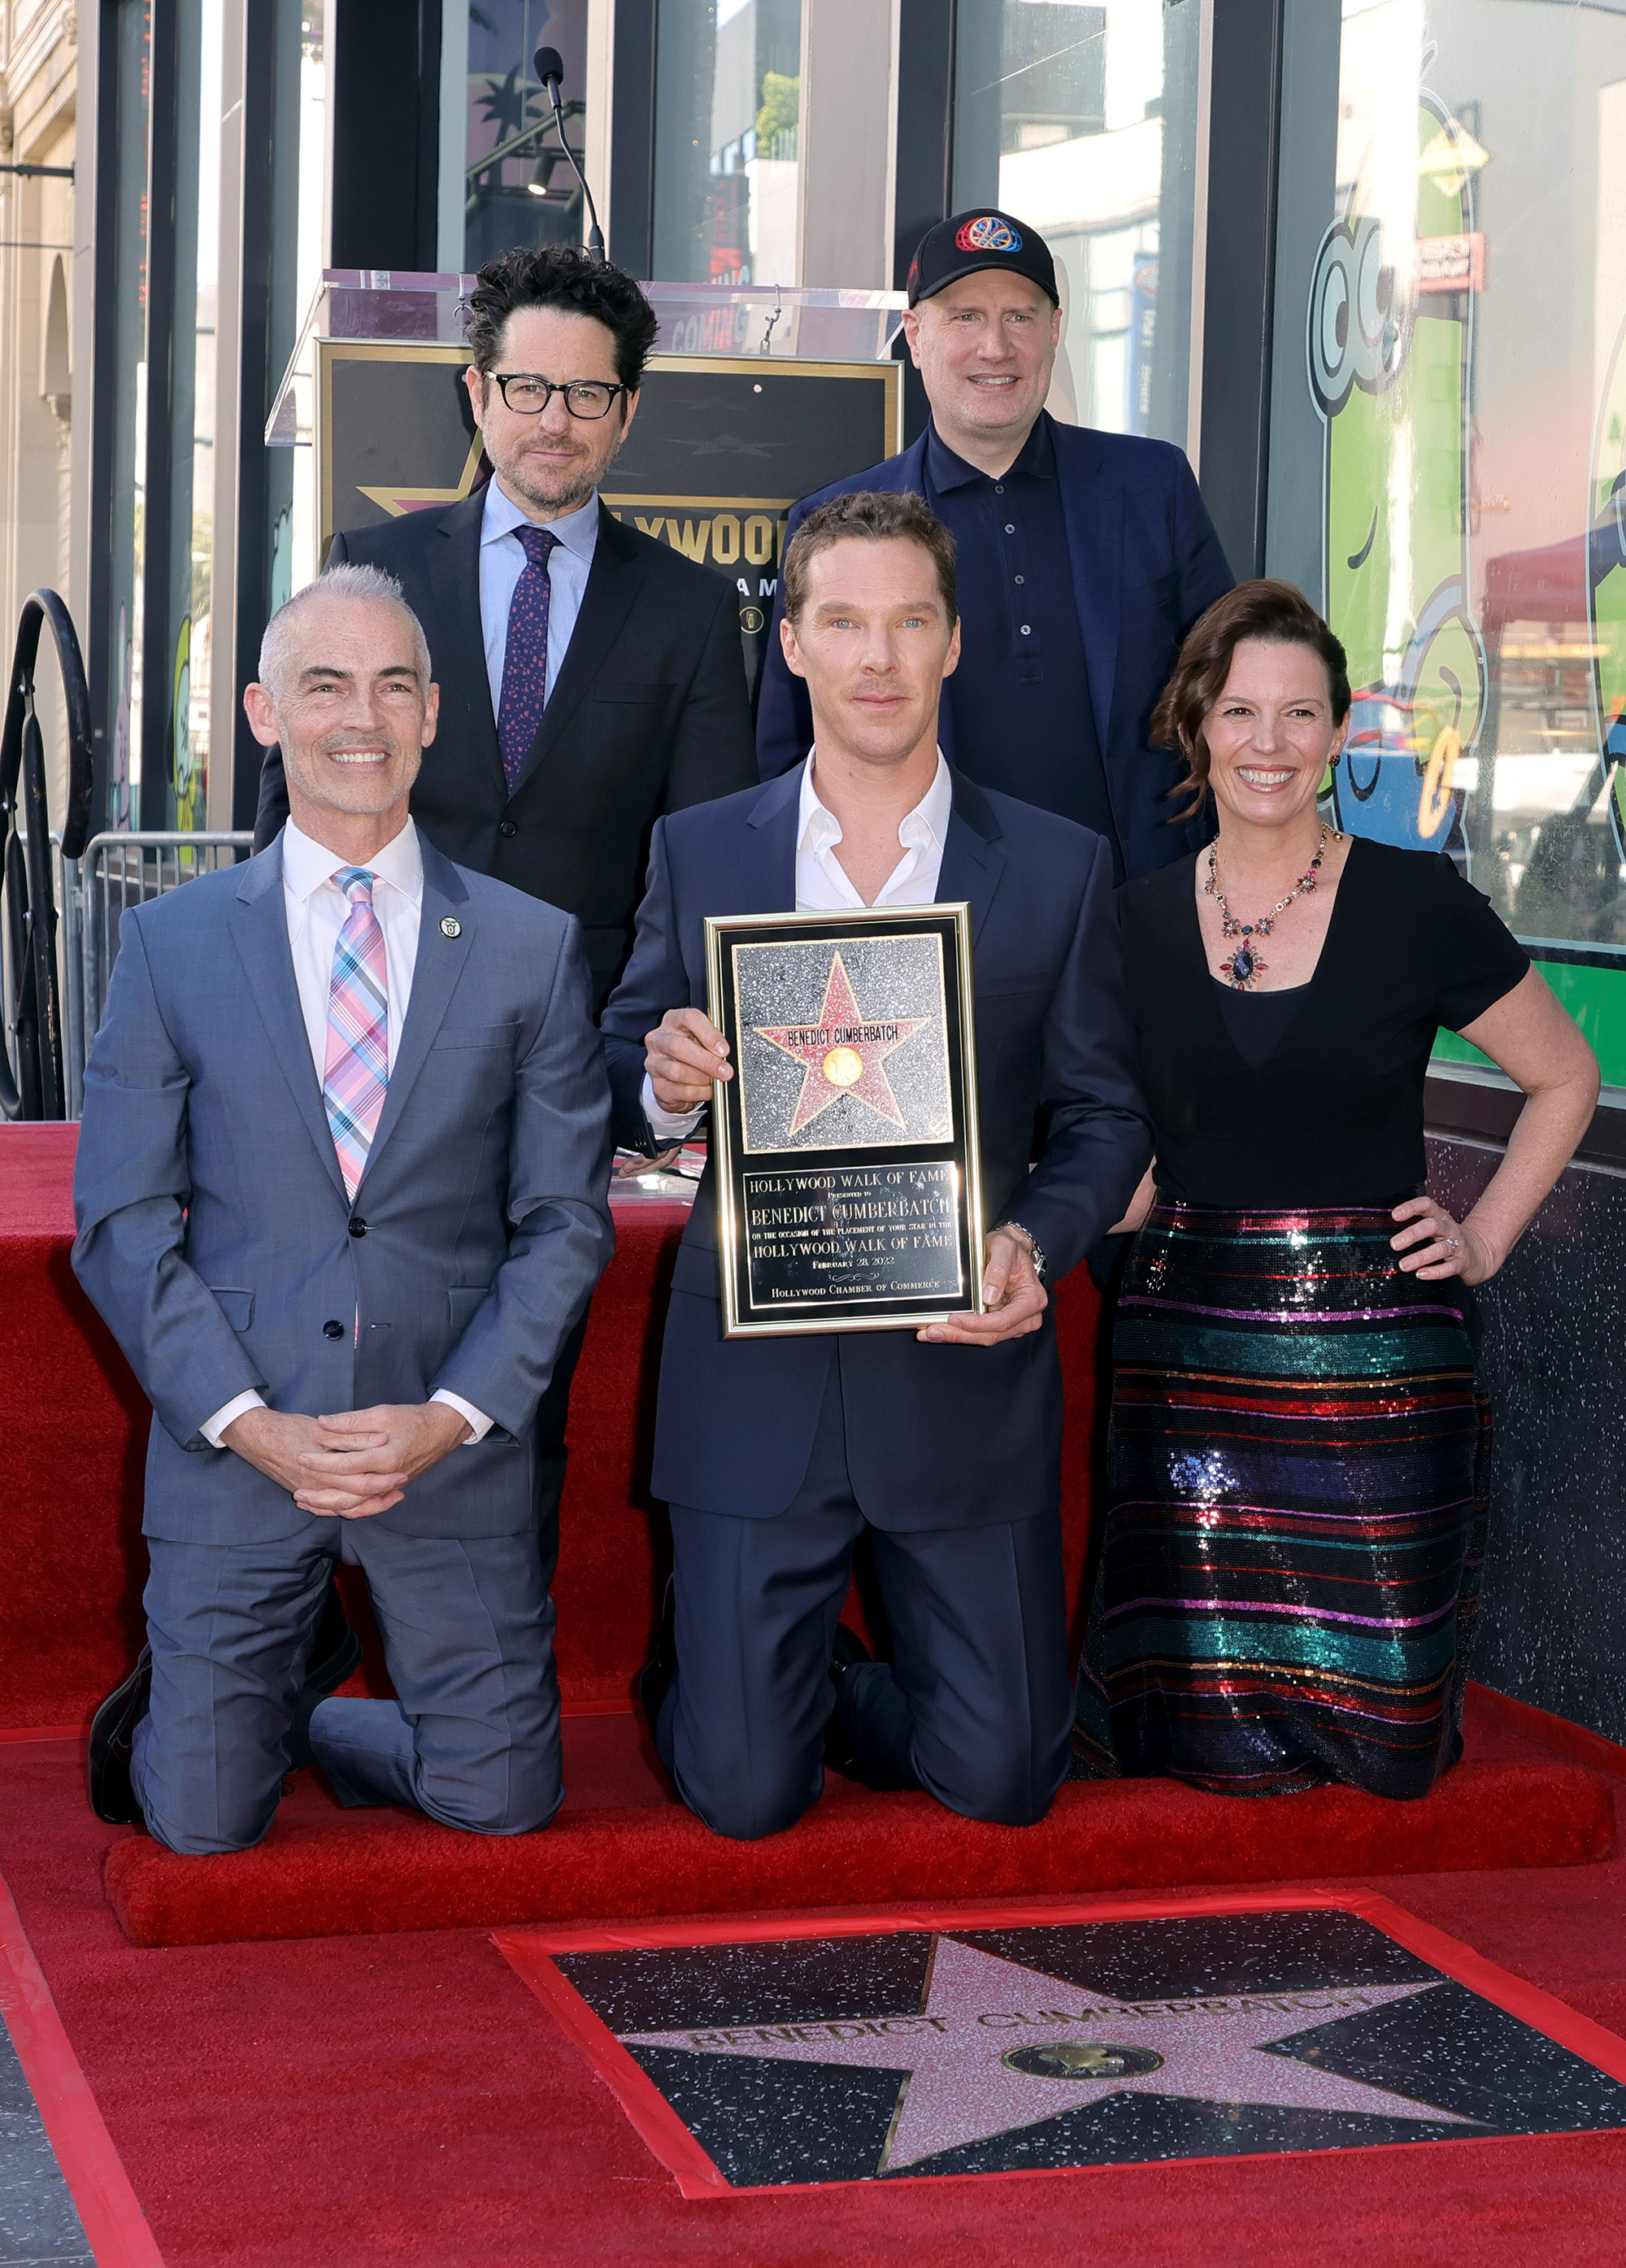 (L-R) Mitch O'Farrell, J. J. Abrams, Benedict Cumberbatch, Kevin Feige and Nicole Mihalka, Chair of the Hollywood Chamber of Commerce attend the Hollywood Walk of Fame Star Ceremony for Benedict Cumberbatch on Feb. 28, 2022, in Hollywood, Calif.